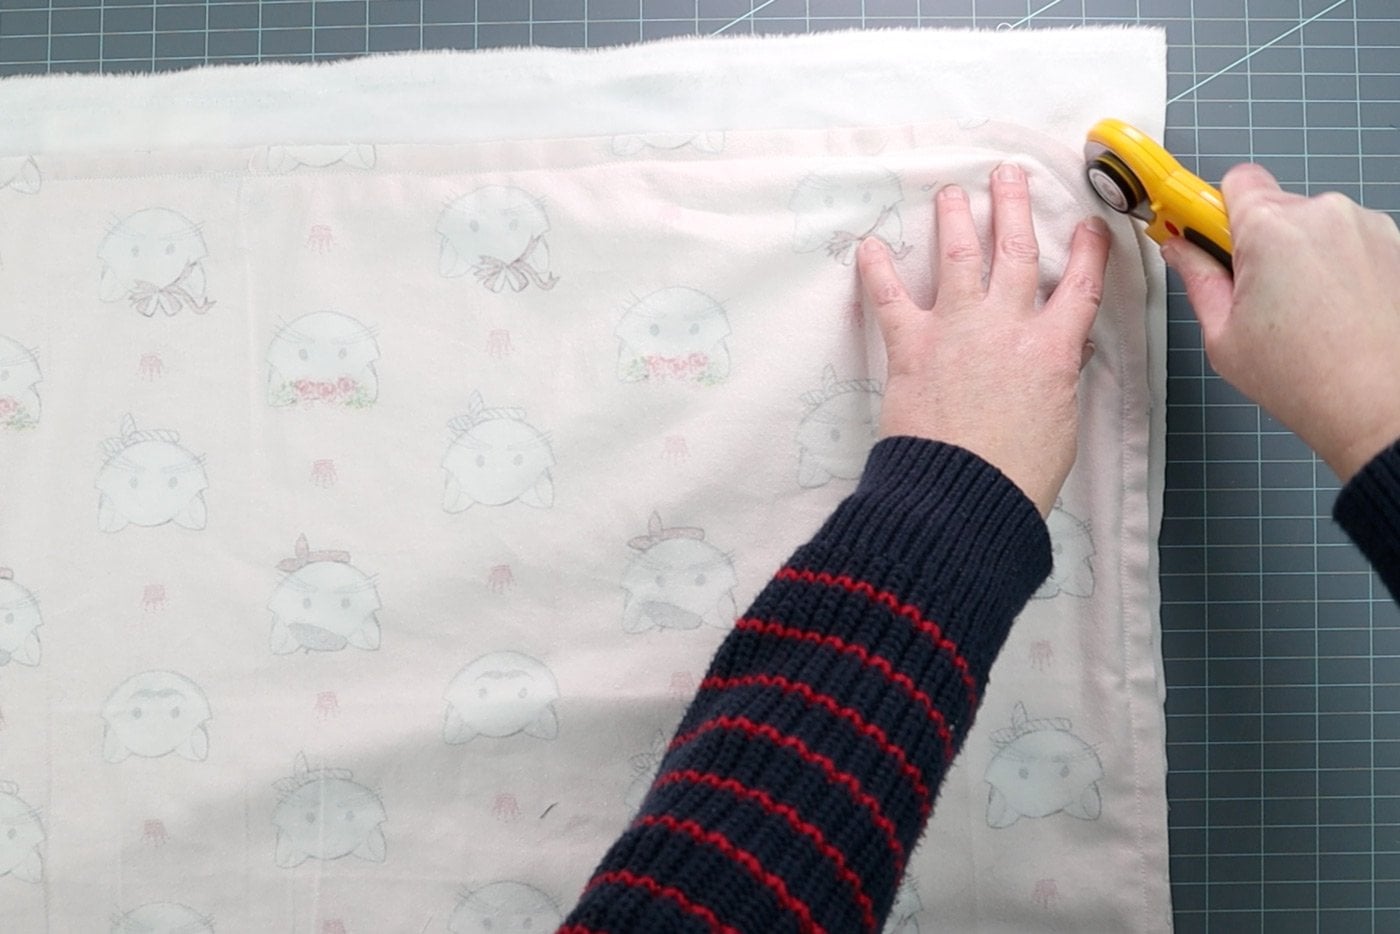 rotary cutter trimming fabric